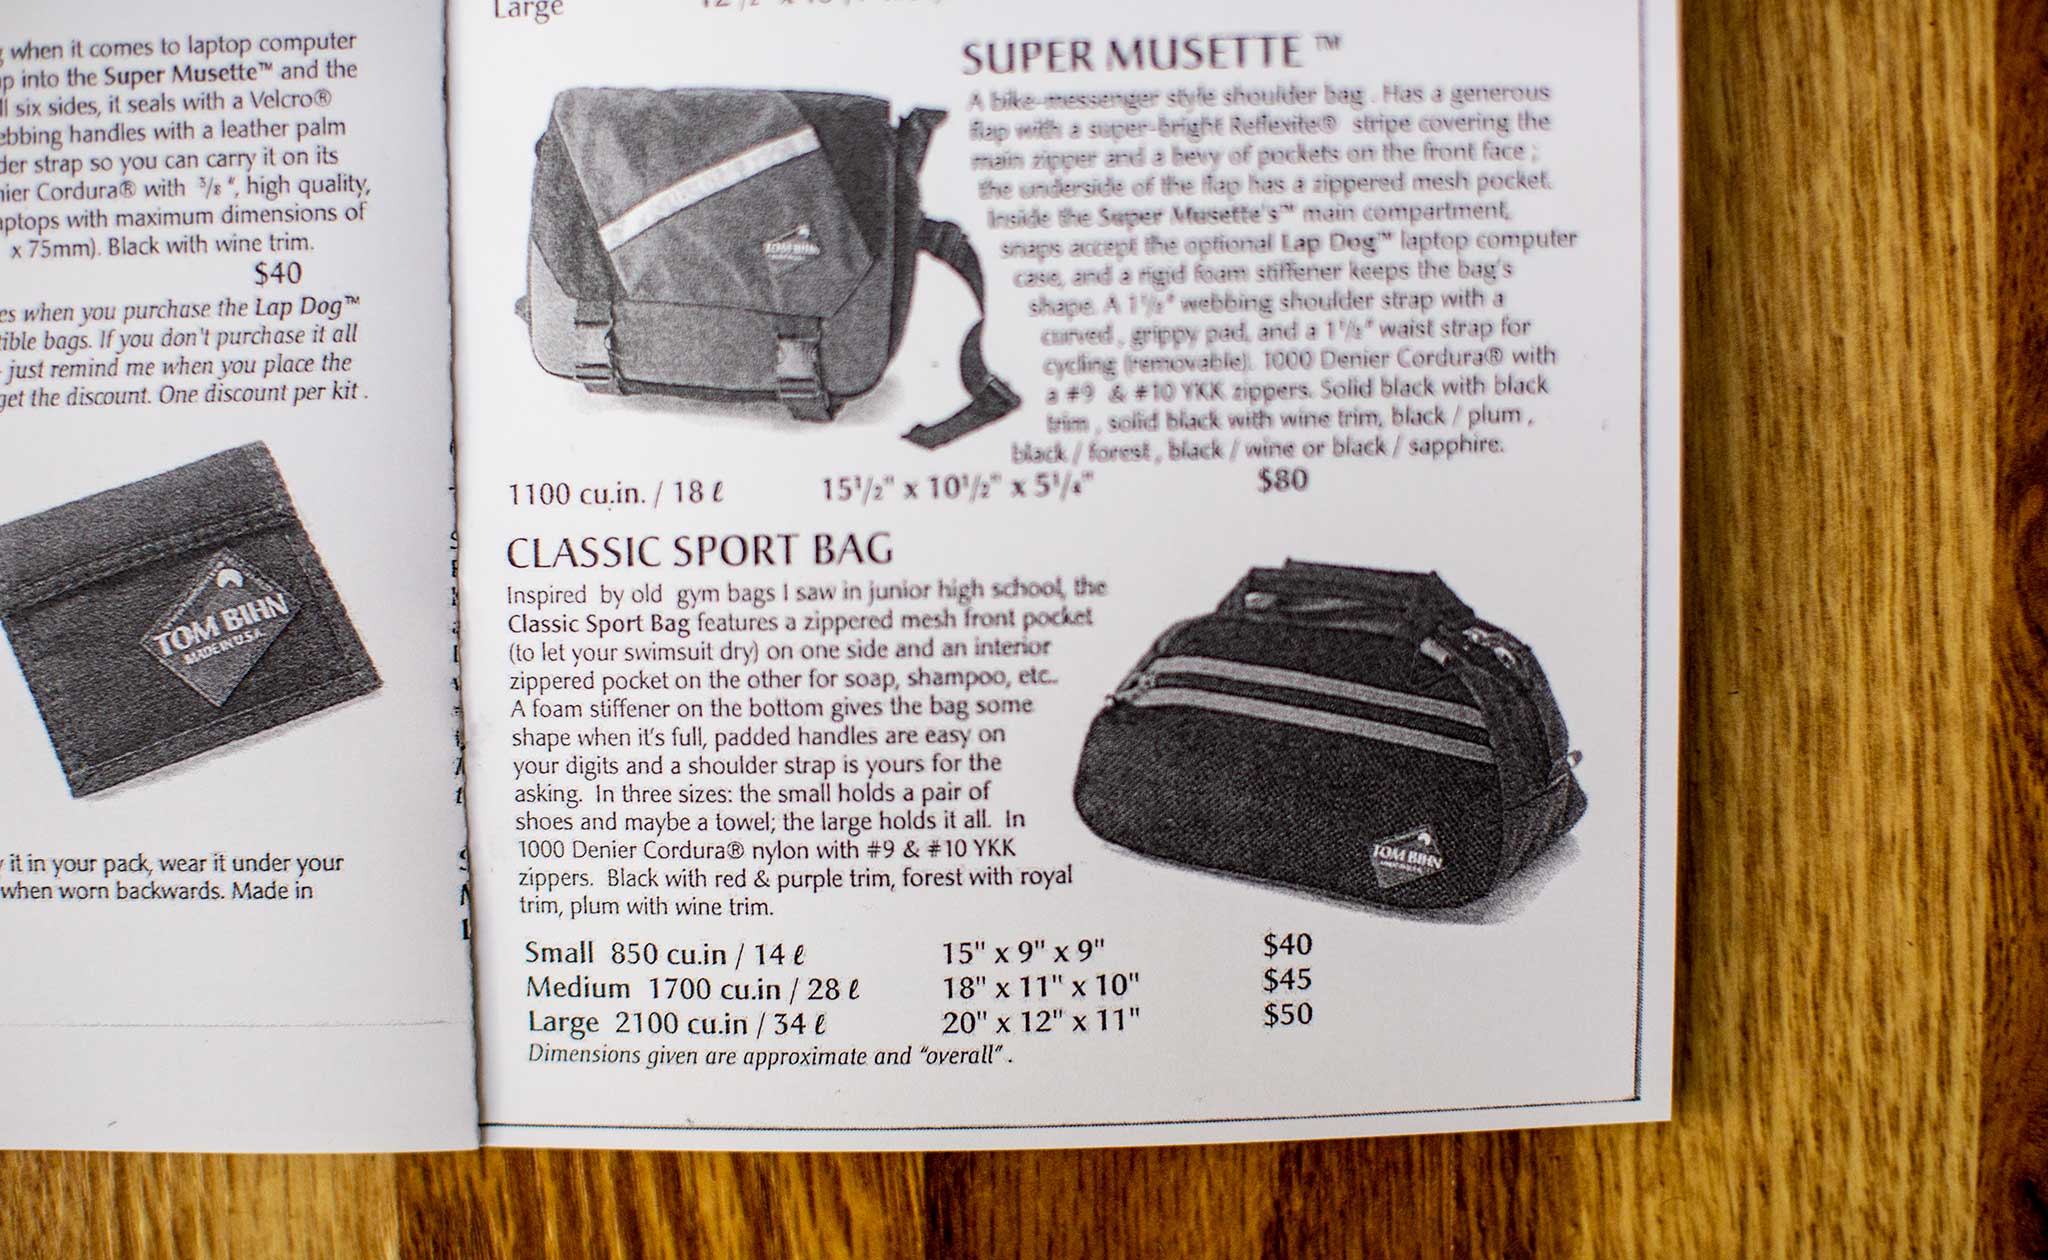 Photo of a TOM BIHN catalog from the 1990's featuring the Classic Sport Bag.